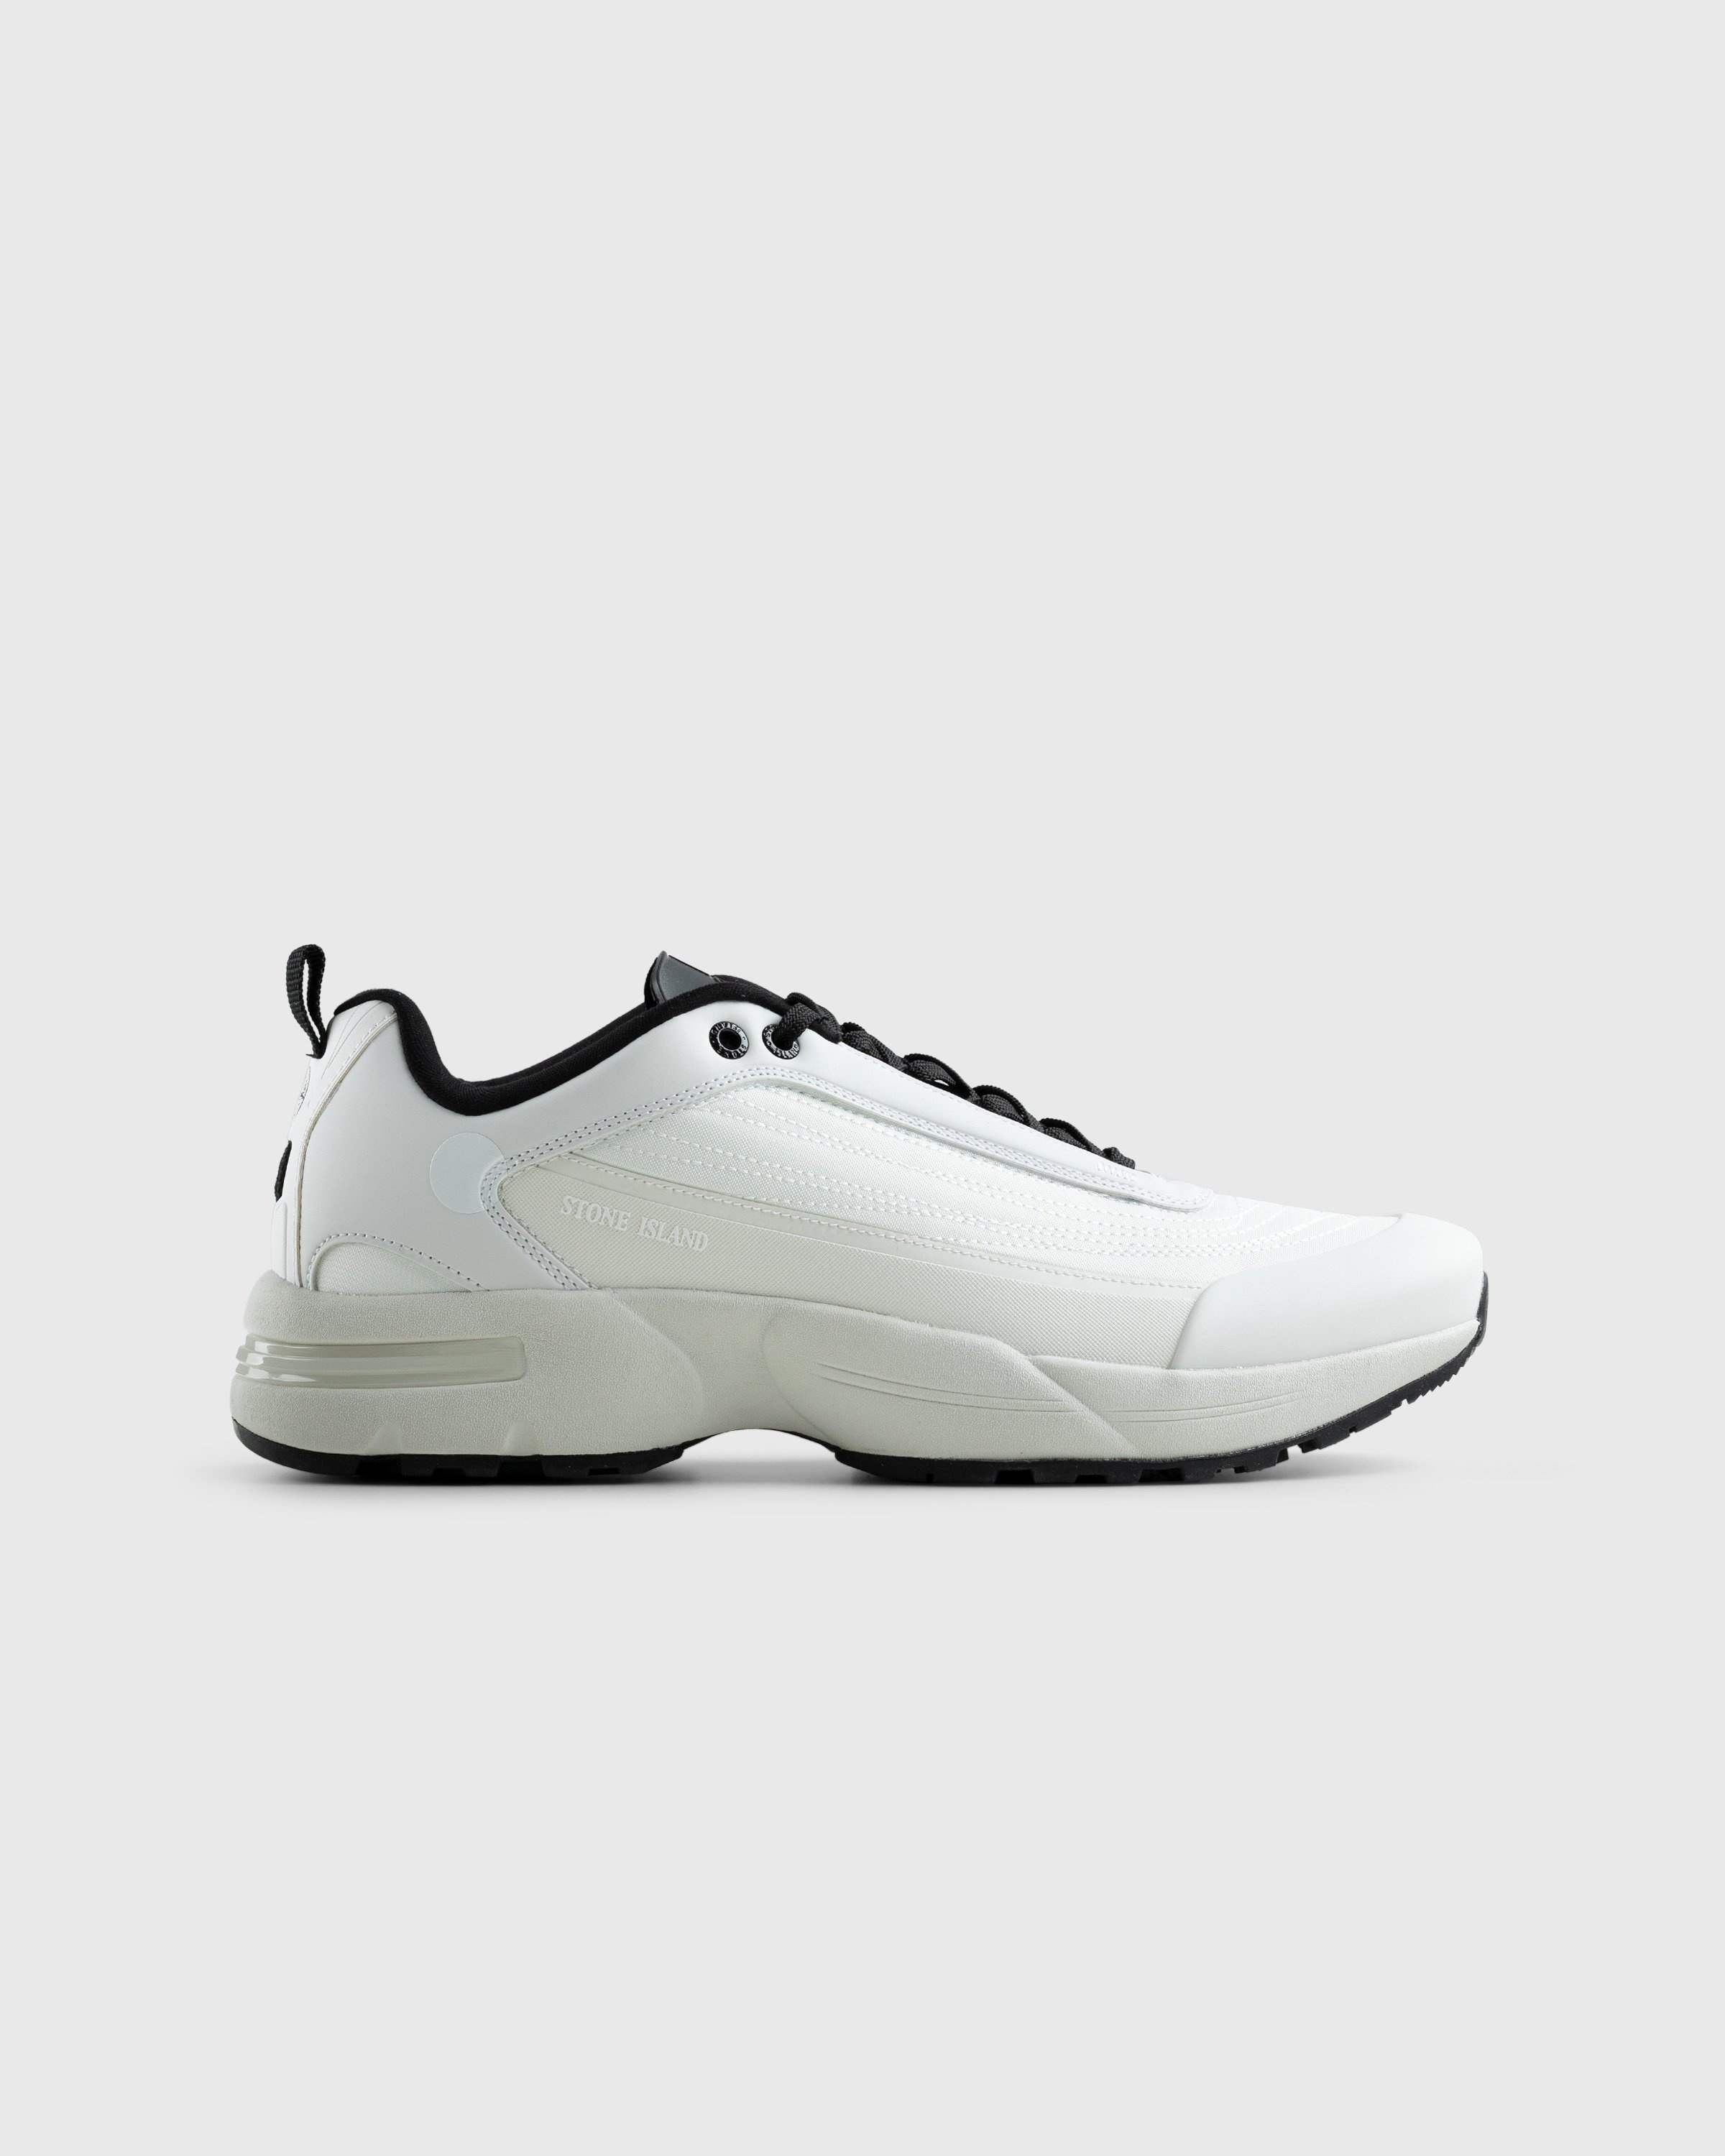 Stone Island – Grime Sneaker White - Low Top Sneakers - White - Image 1